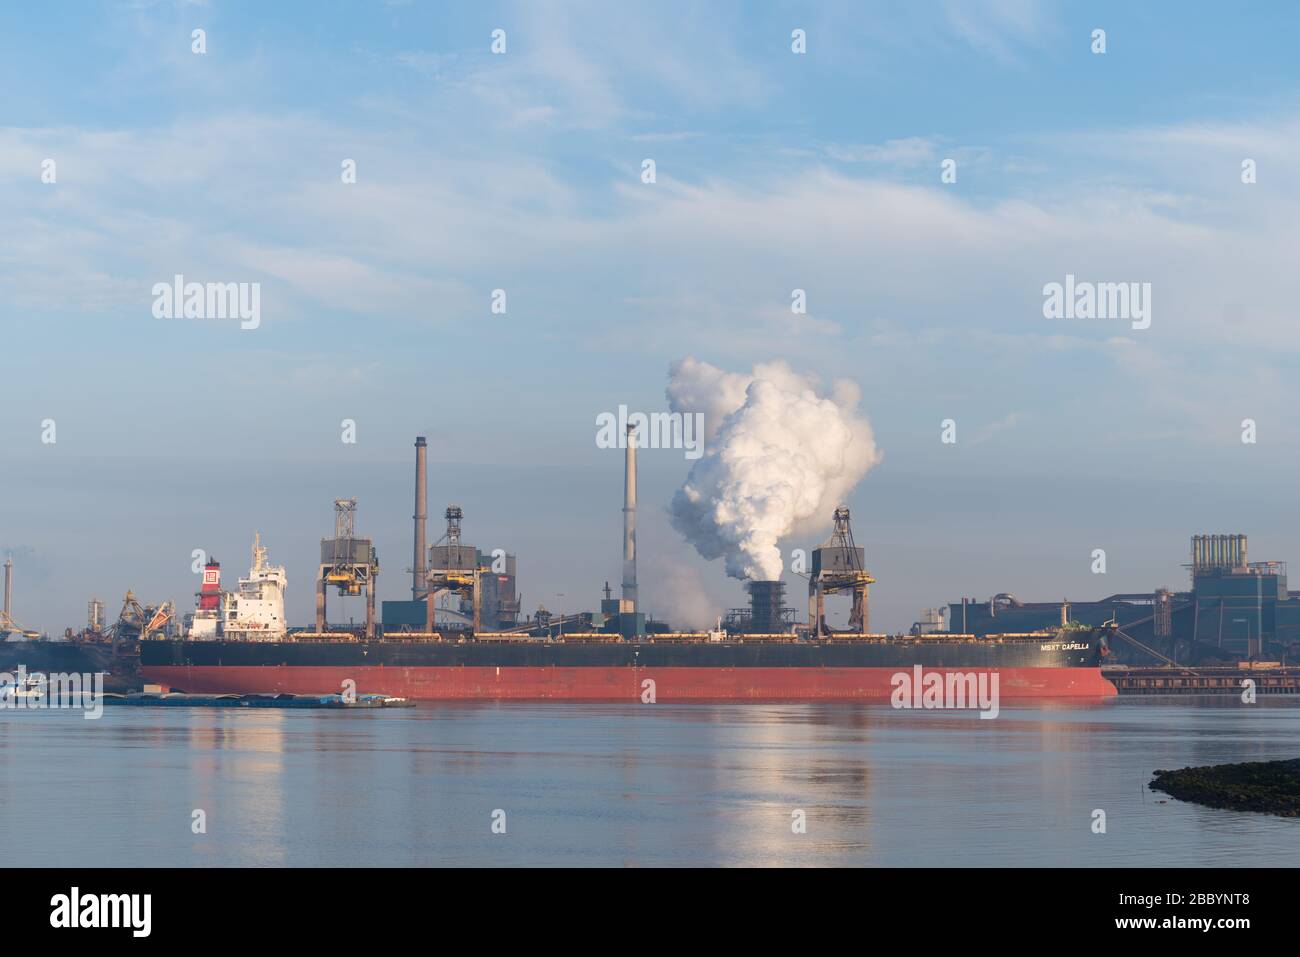 IJMUIDEN, NETHERLANDS - OCTOBER 6, 2018: Large cargo ship moored in front of Tata Steel Company Stock Photo